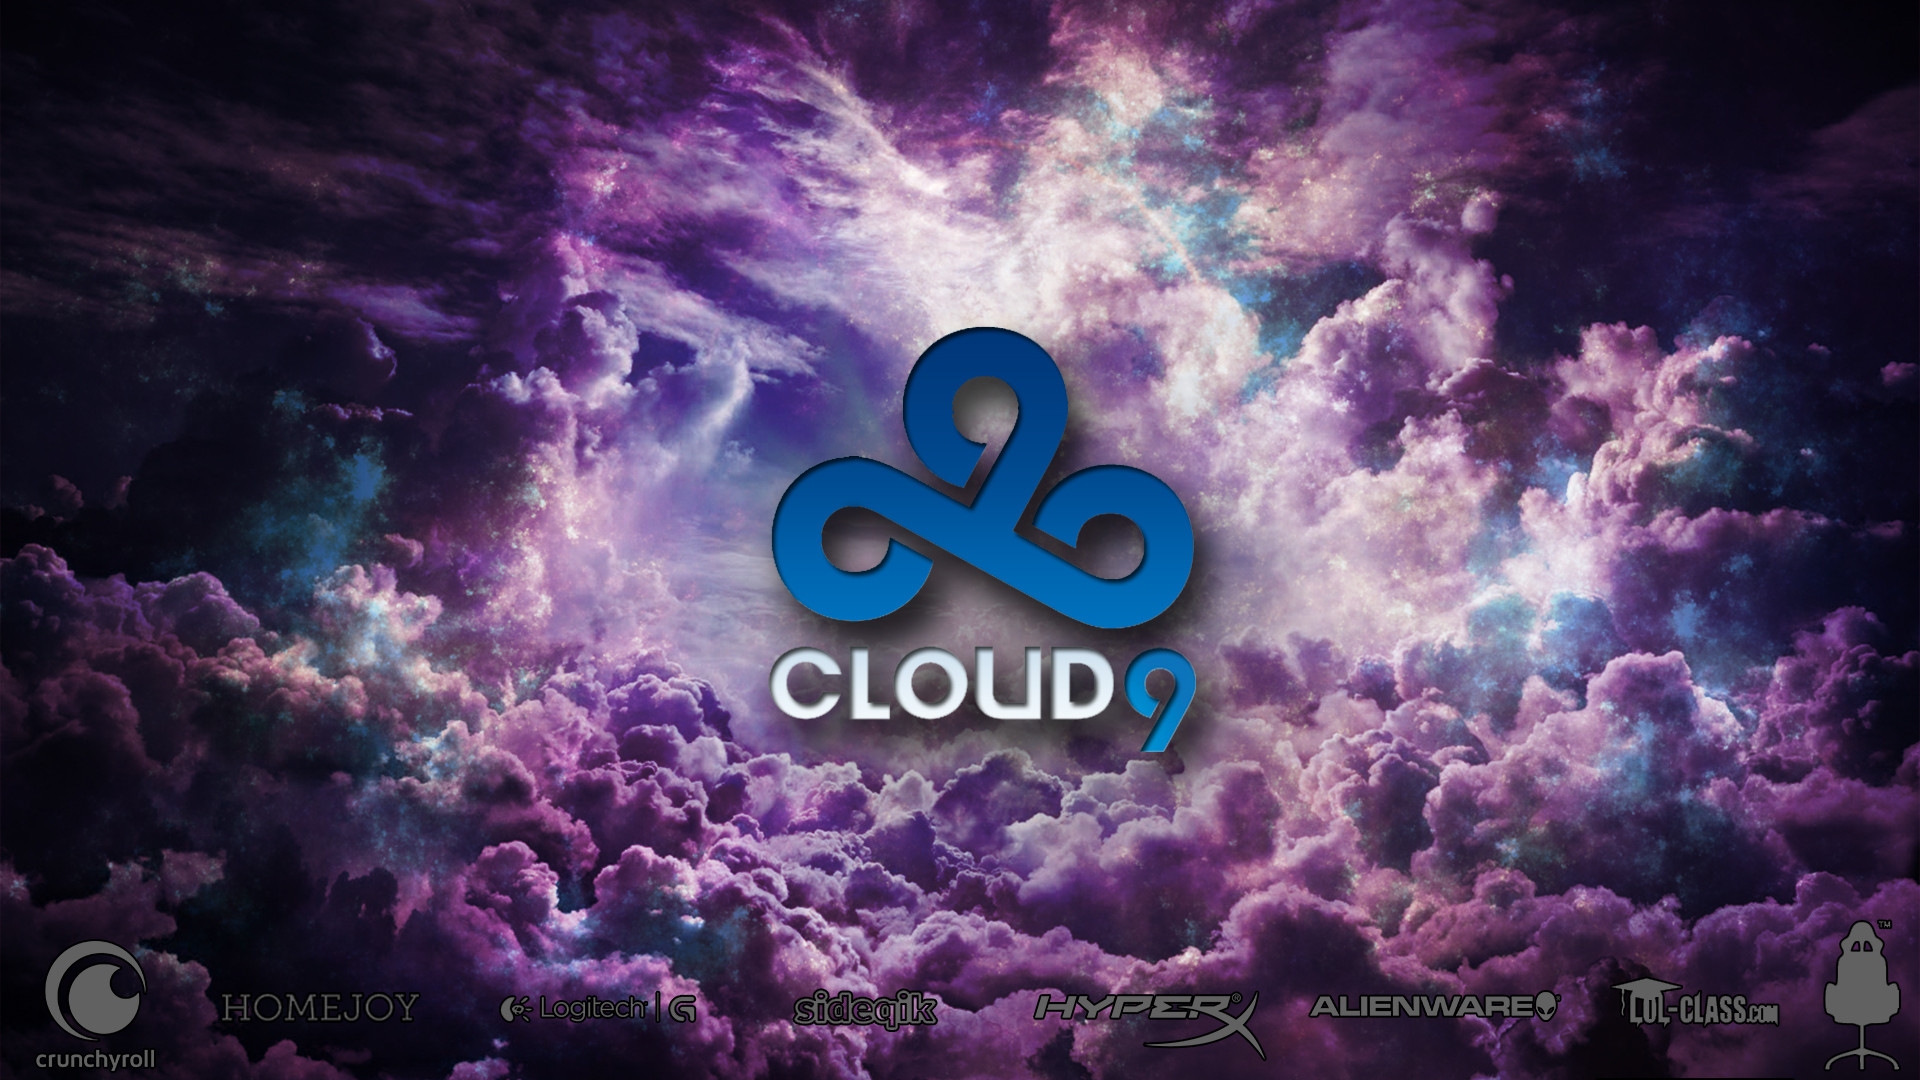 Readditing Cloud Wallpaper With Sponsors I Will Post